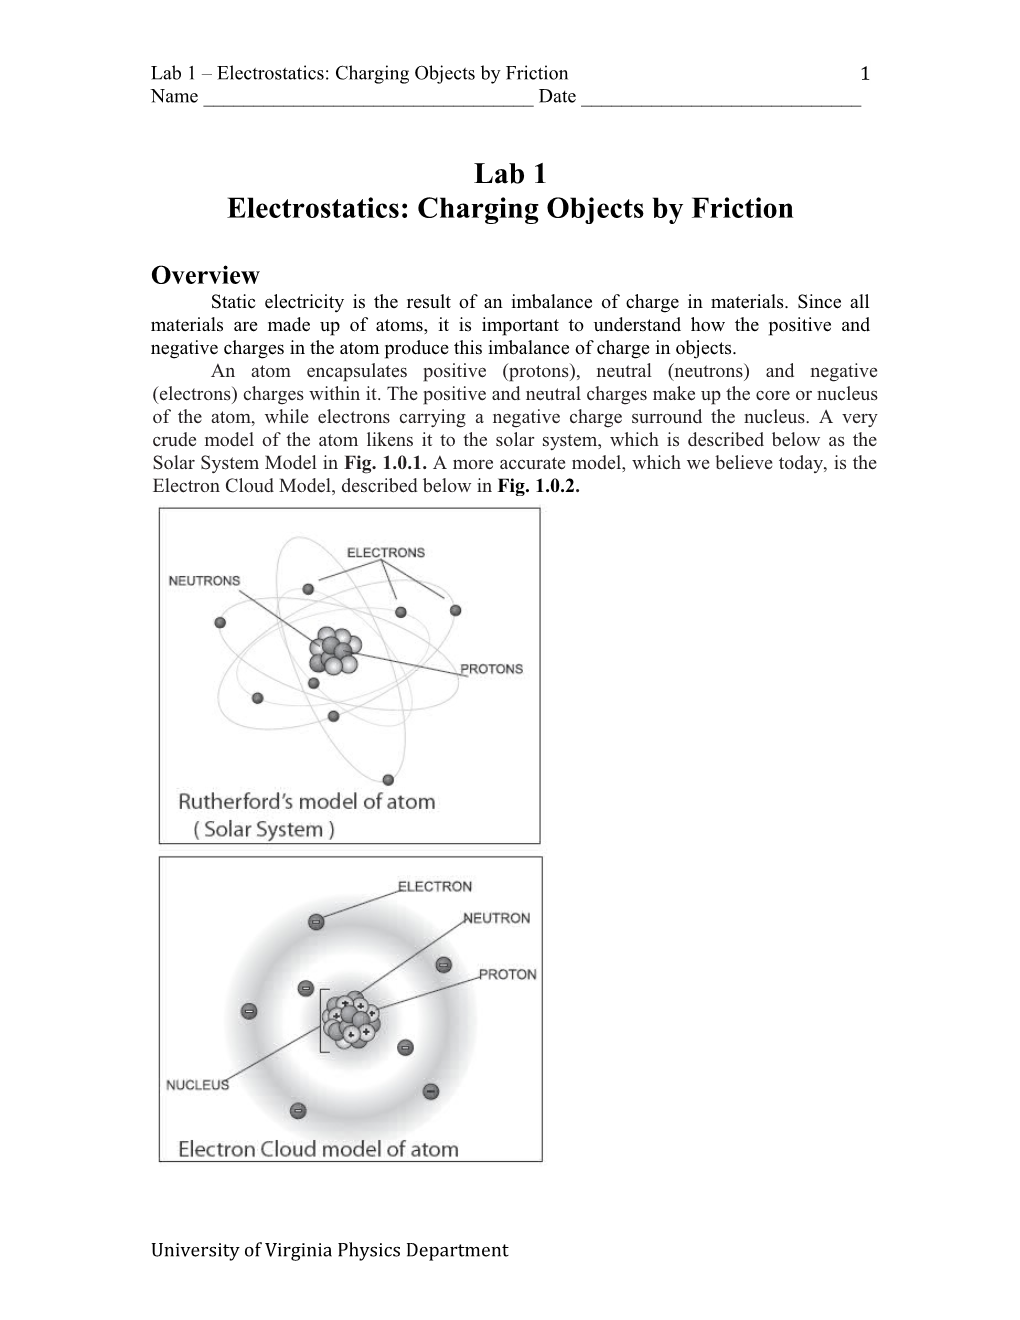 Electrostatics: Charging Objects by Friction